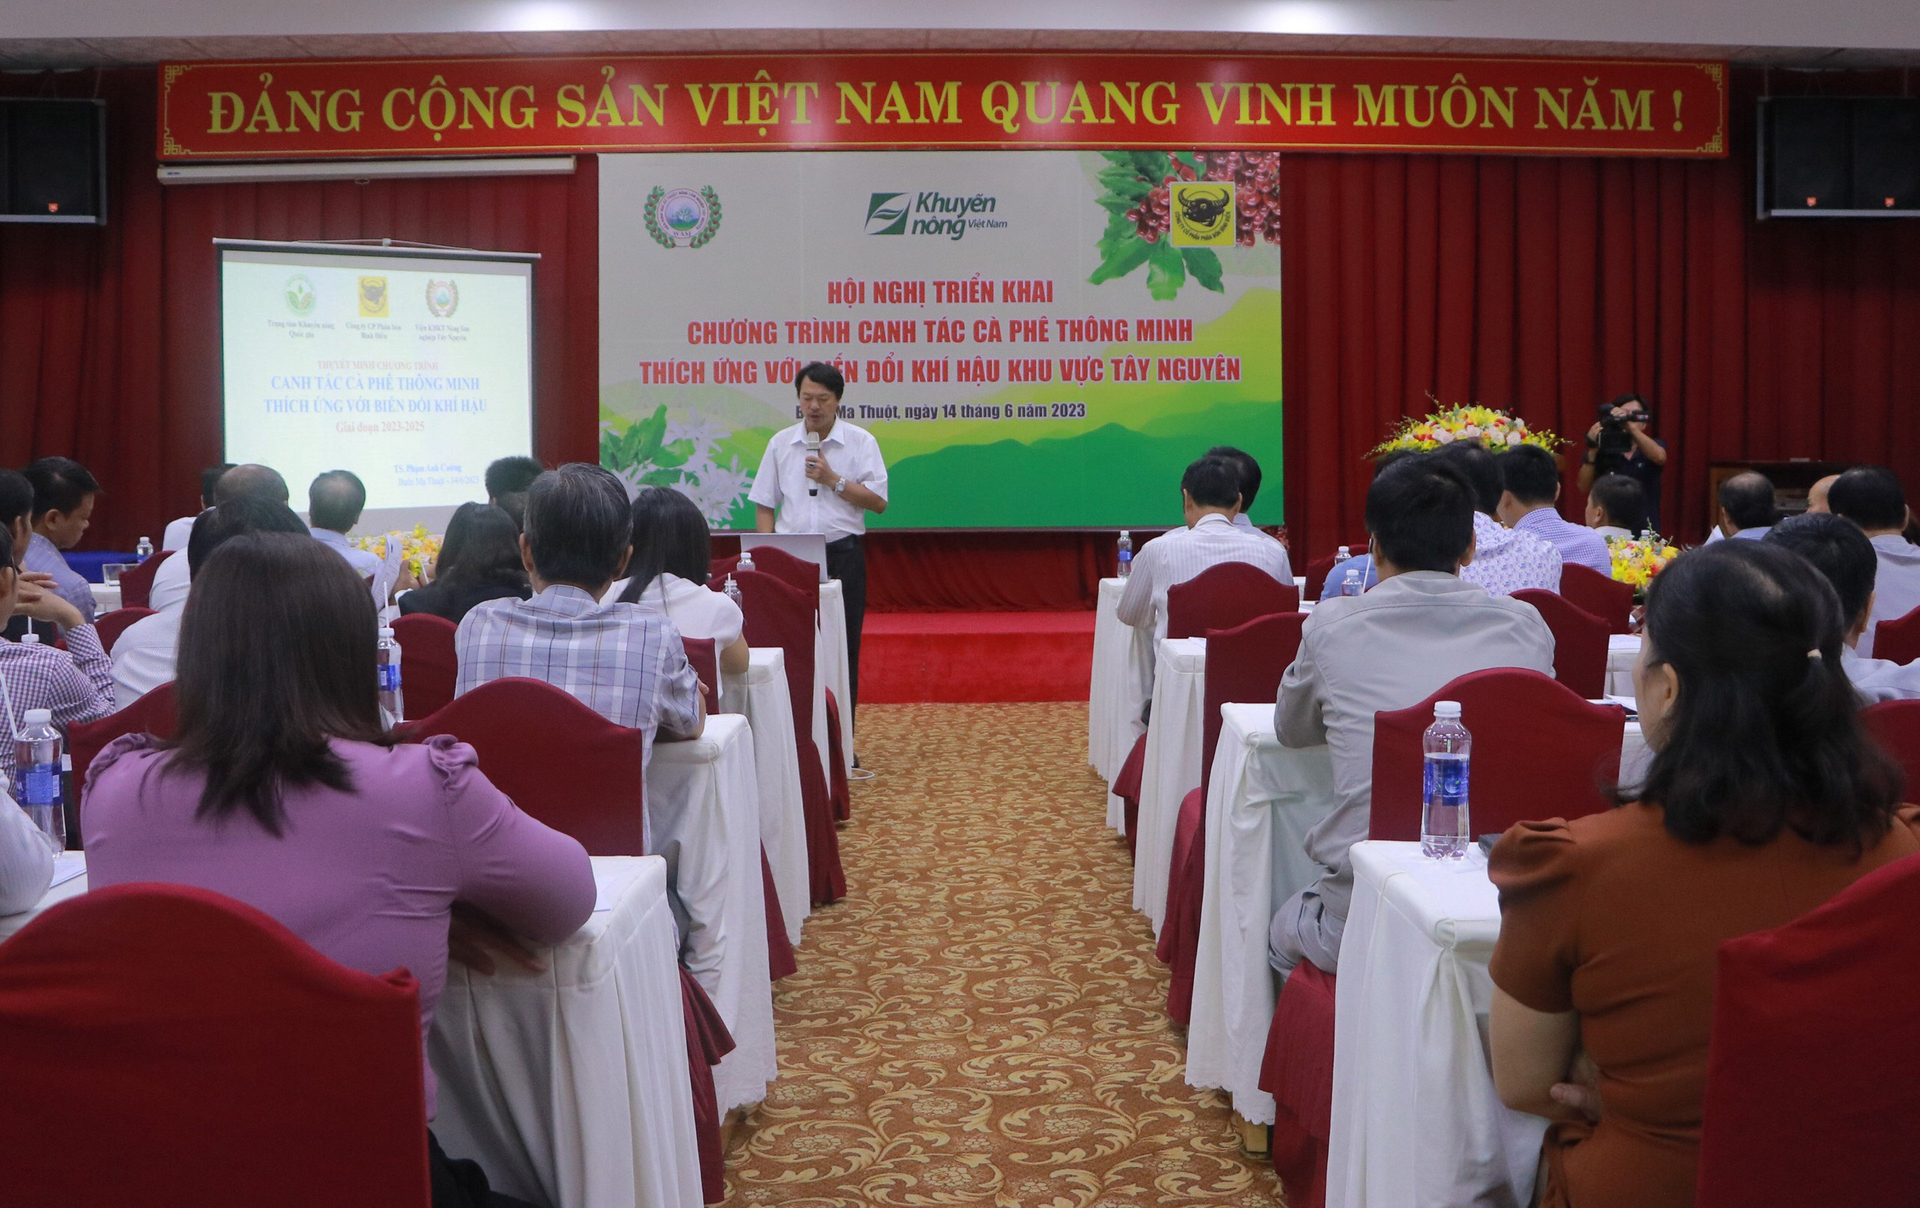 Delegates participating in the conference to implement the program 'Smart coffee farming to adapt to climate change in the Central Highlands' in the period of 2023 - 2025. Photo: Quang Yen.